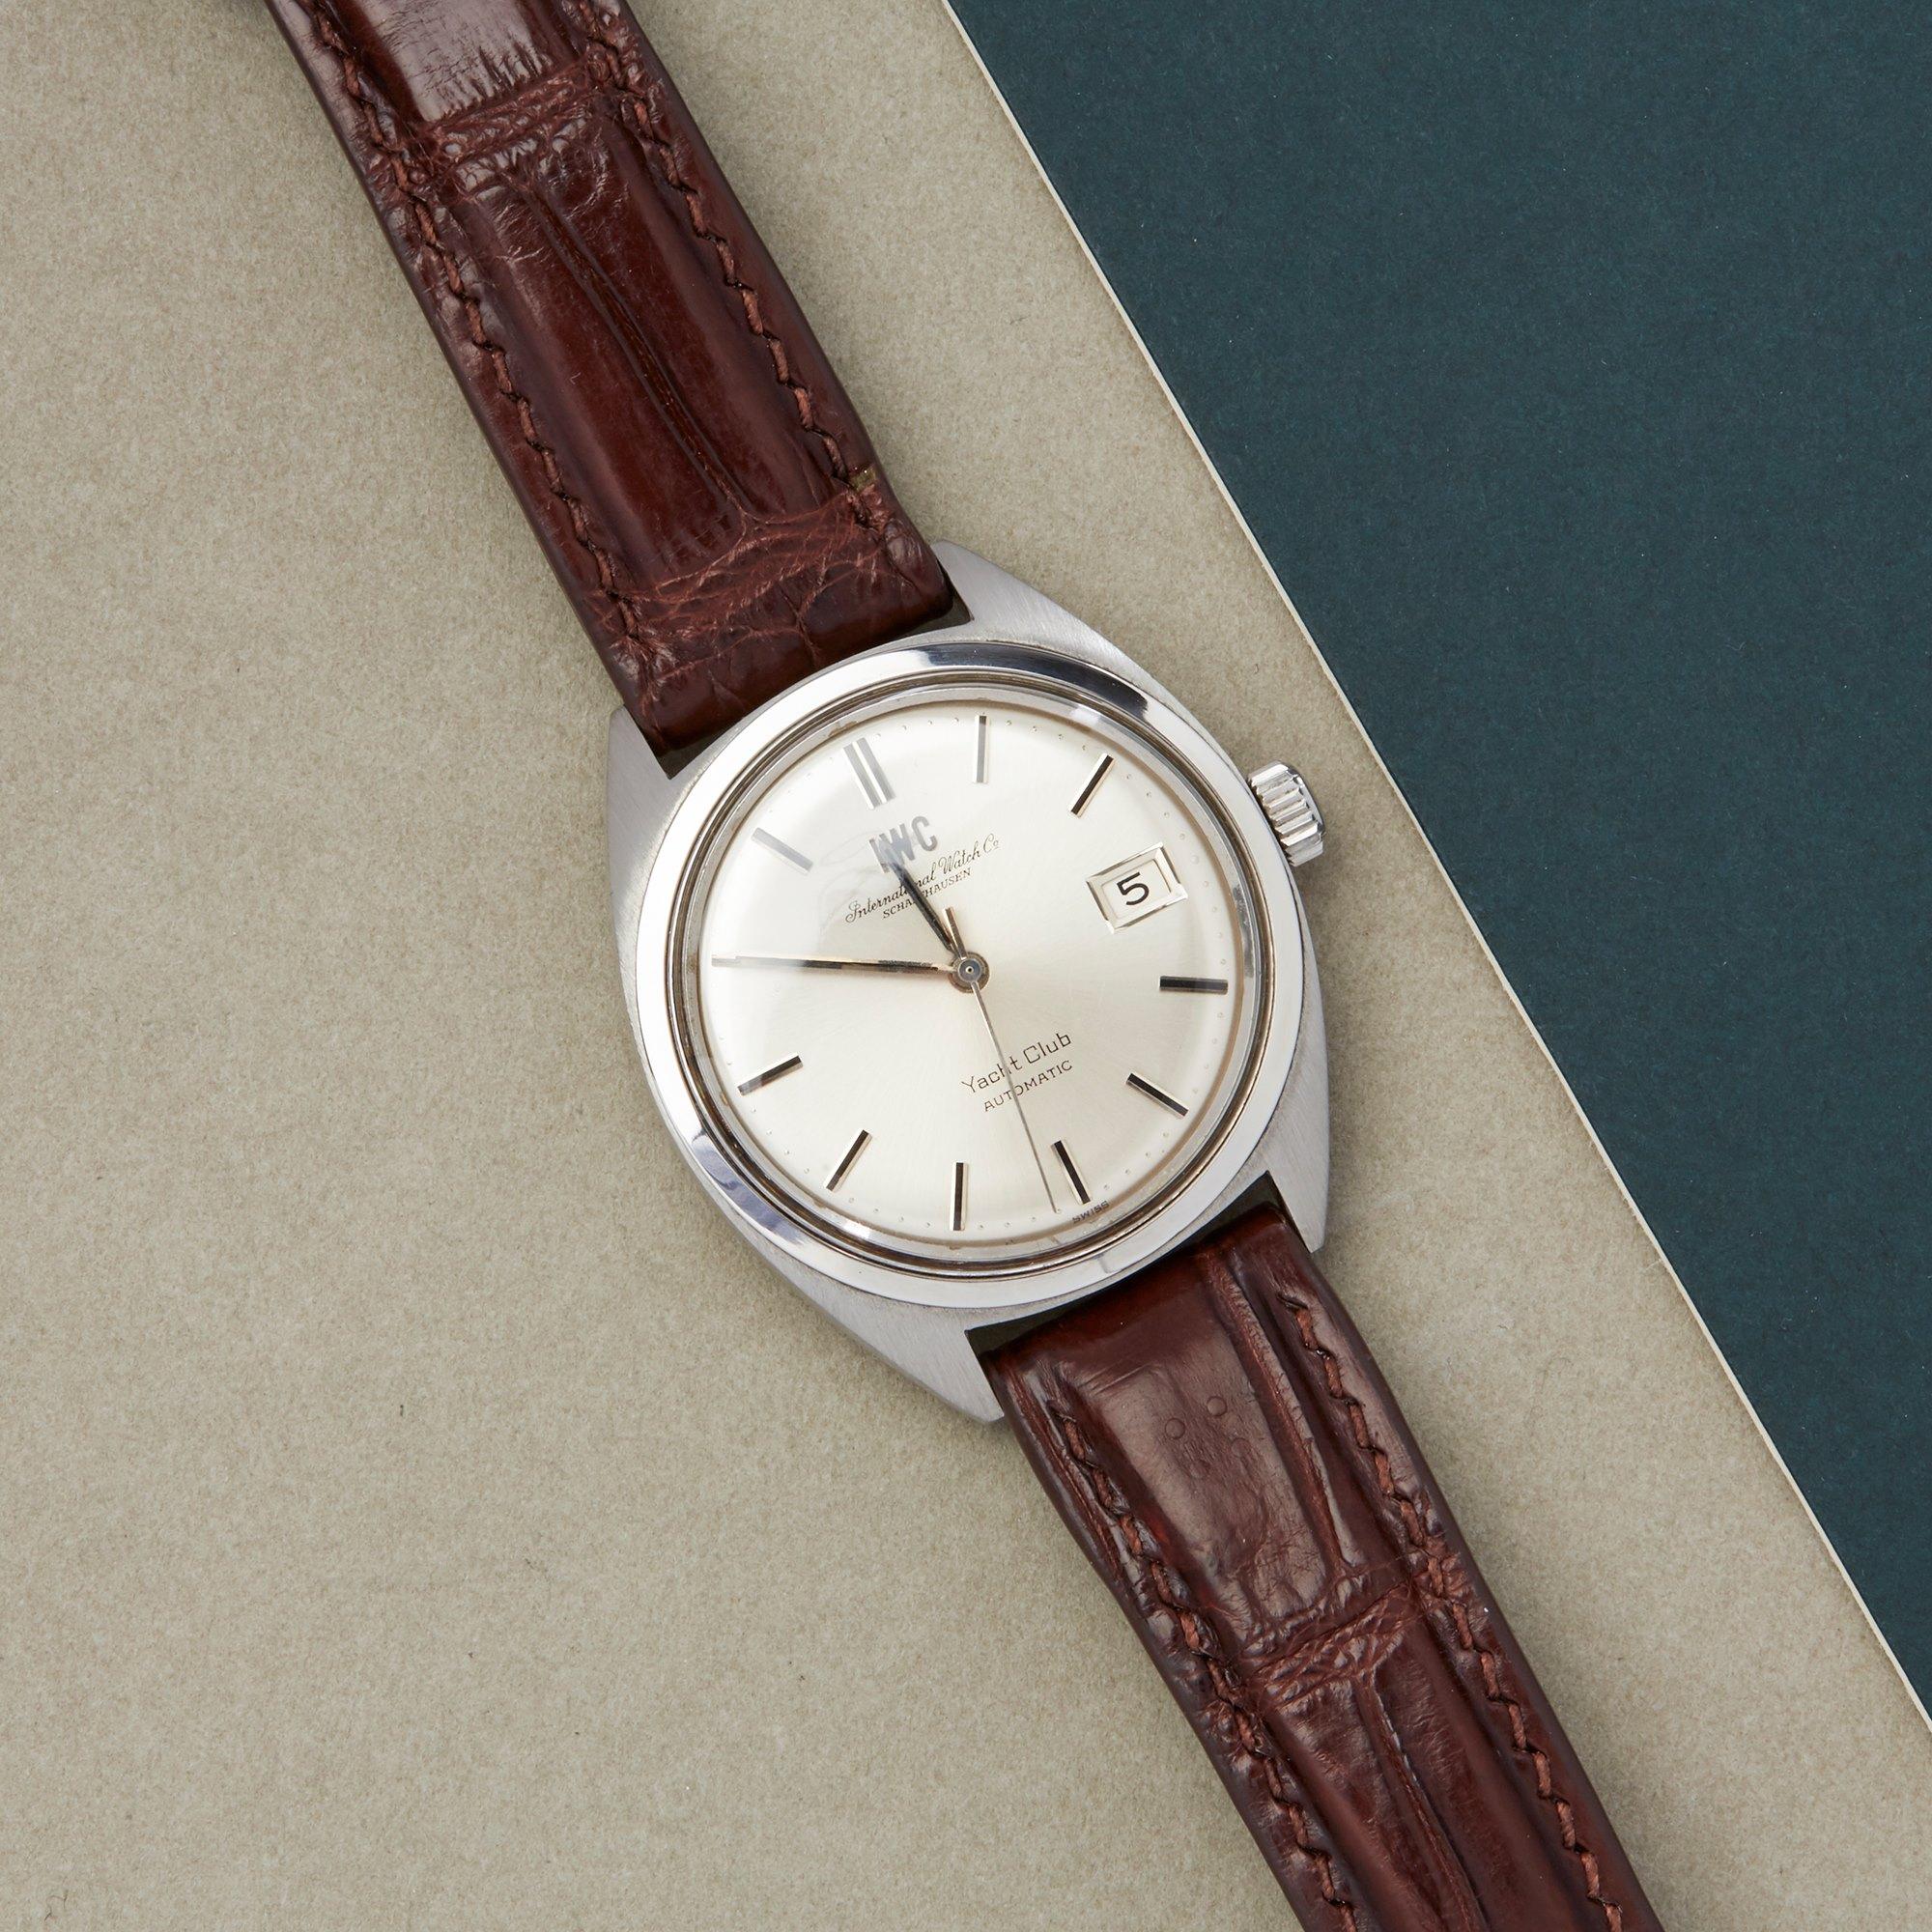 Xupes Reference: COM002623
Manufacturer: IWC
Model: Yacht Club
Model Variant: 0
Model Number: C.8541B 5 Adjust
Age: 1970
Gender: Men
Complete With: IWC Box
Dial: Silver Baton
Glass: Plexiglass
Case Material: Stainless Steel
Strap Material: Brown